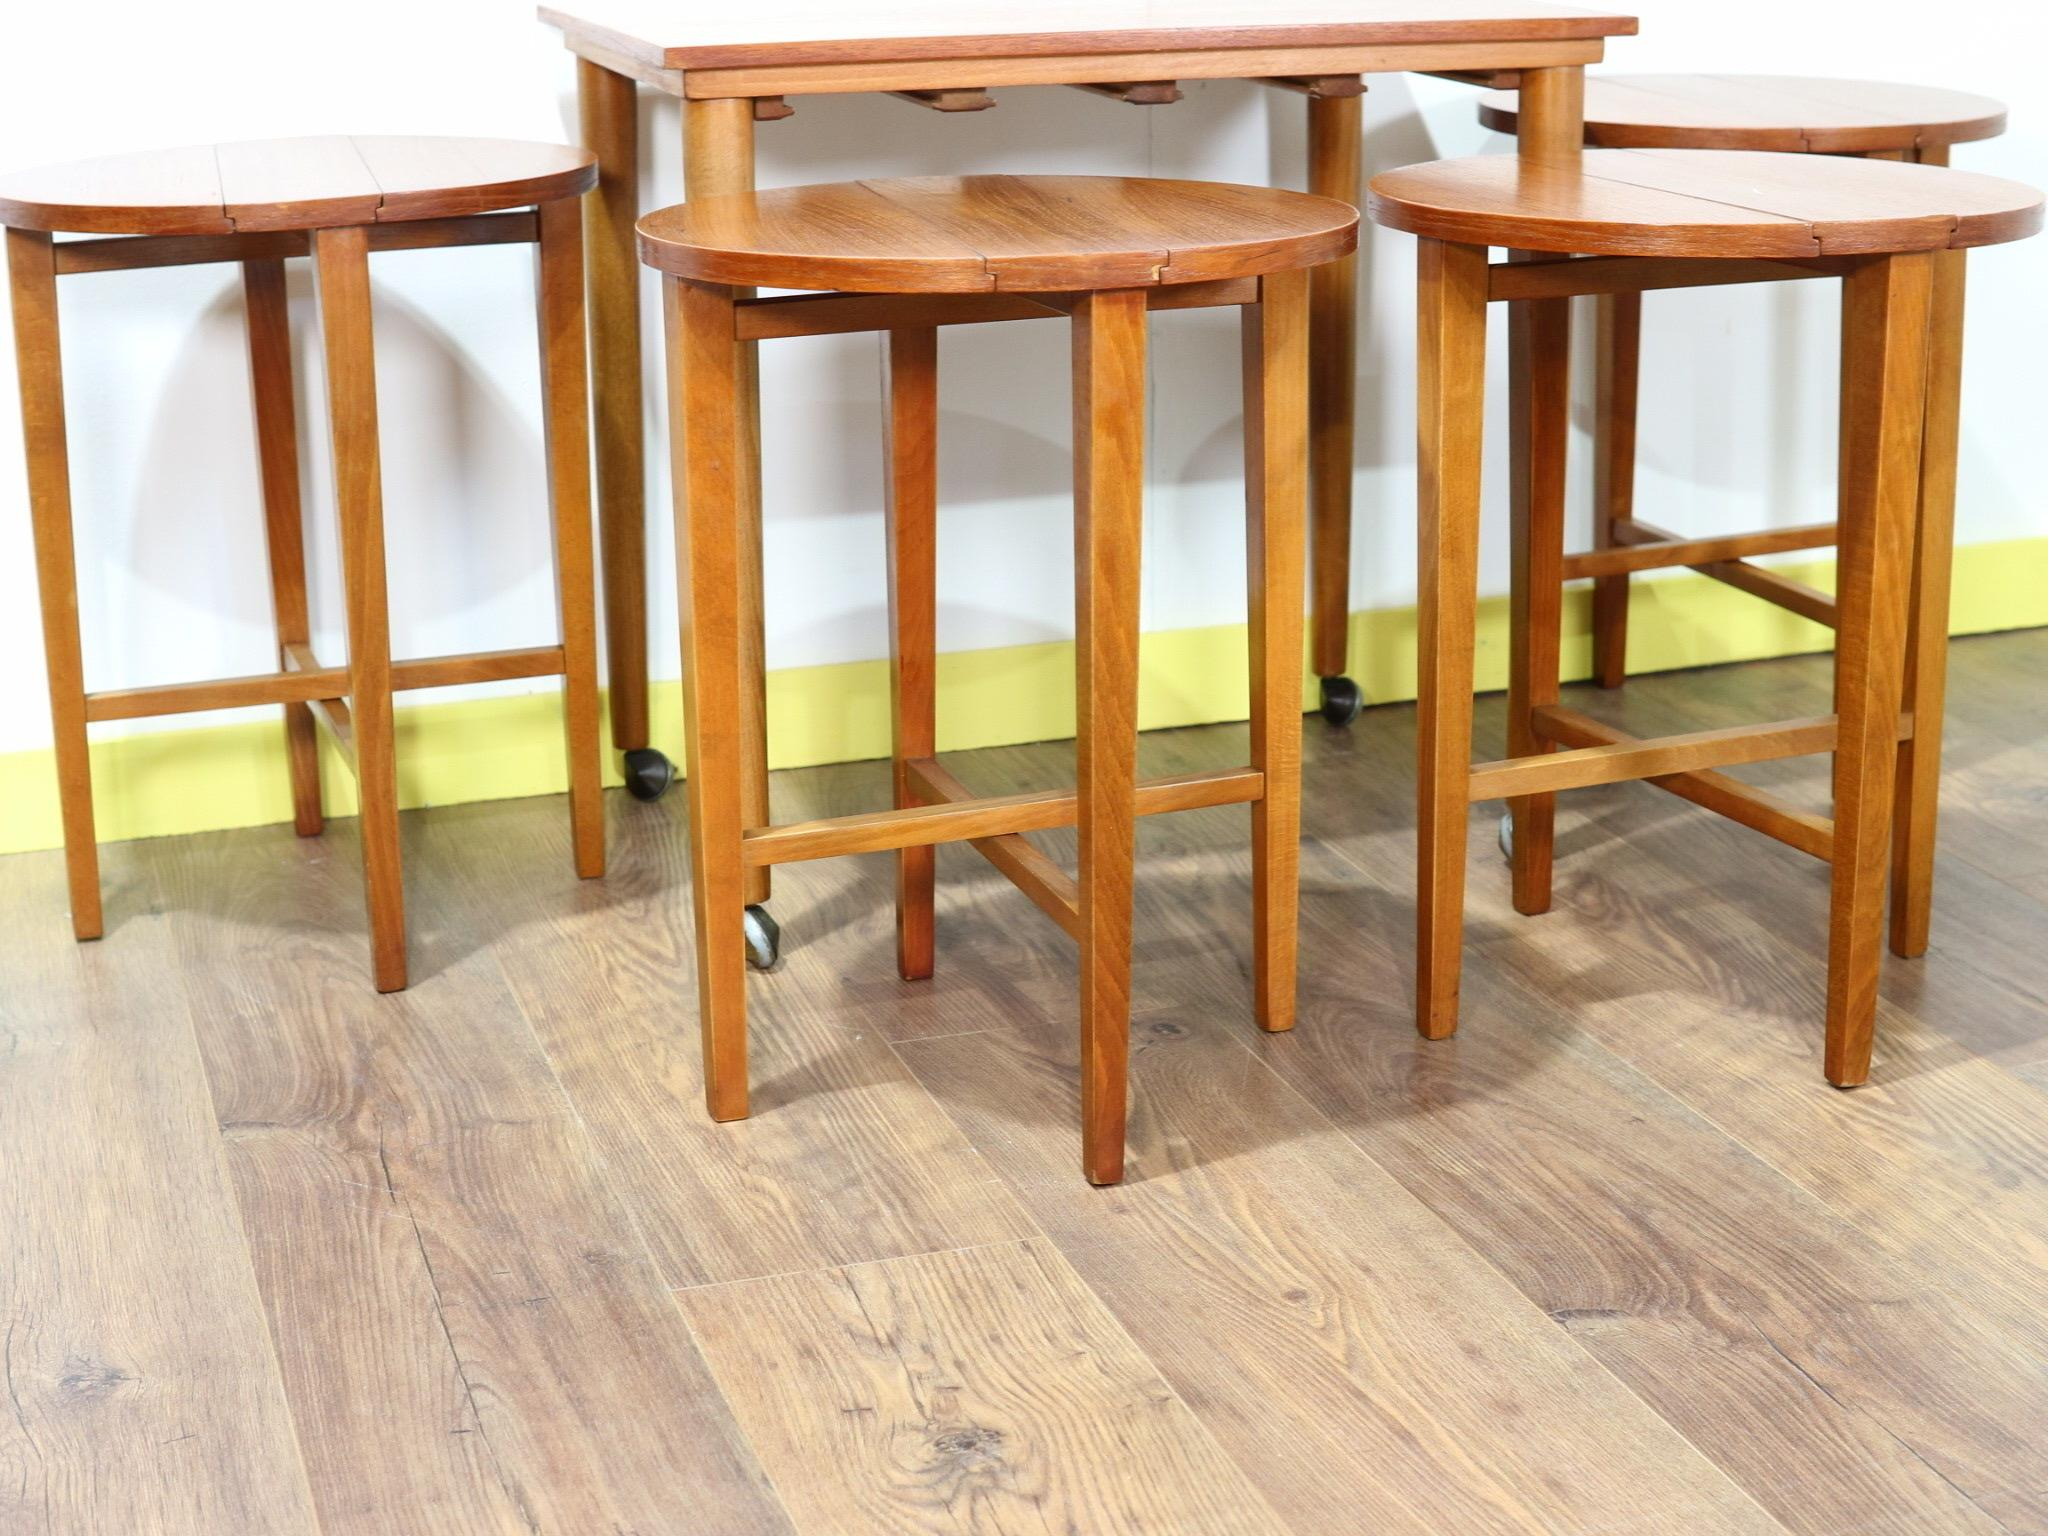 These 1960s Czechoslovakian nesting tables by Poul Hundevad are a really great design and idea. The main table houses 4 drop leaf tables that neatly fold up and slide underneath but offer plenty of table space when they are all unfolded

